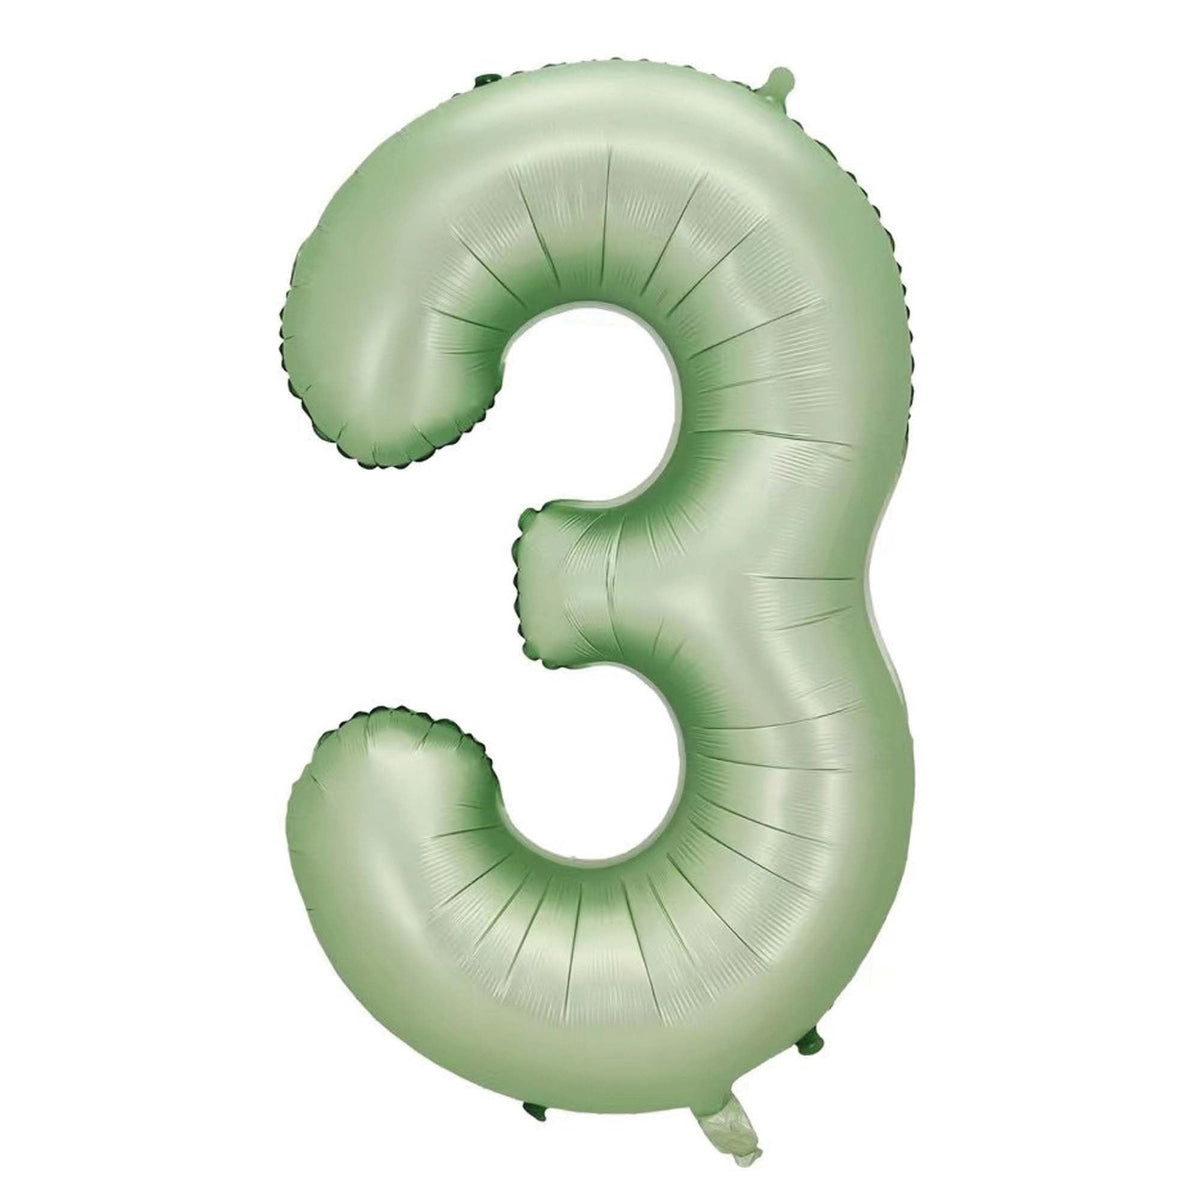 BOOMBA INTERNATIONAL TRADING CO,. LTD Balloons Eucalyptus Matte Green Number 3 Supershape Foil Balloon, 40 Inches, 1 Count 810077659878